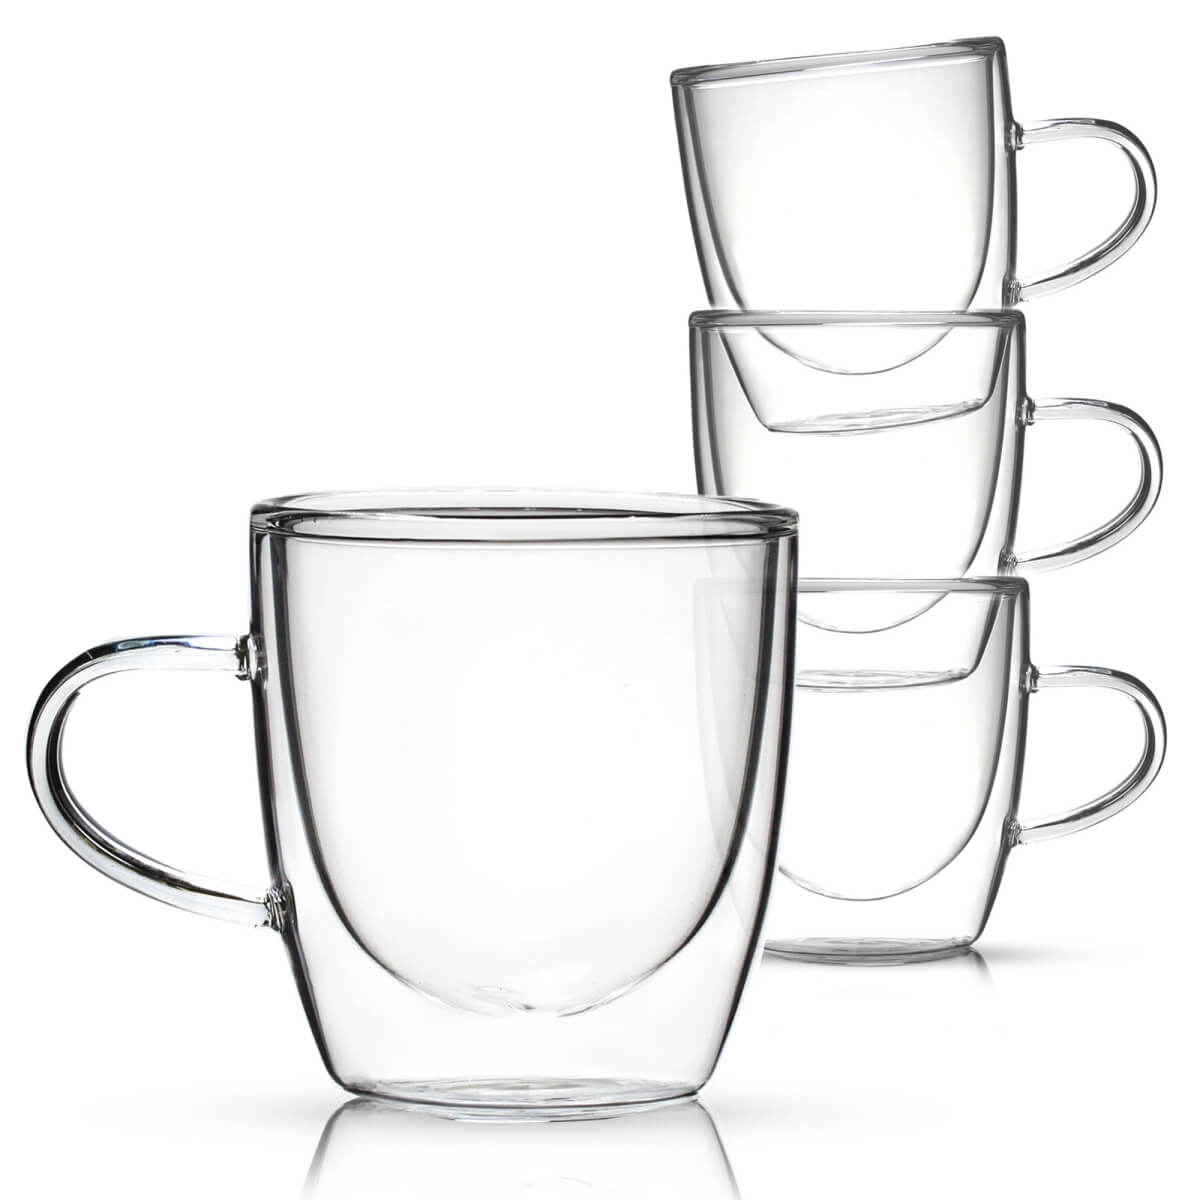 12 oz Double Walled Glasses - Kitchables